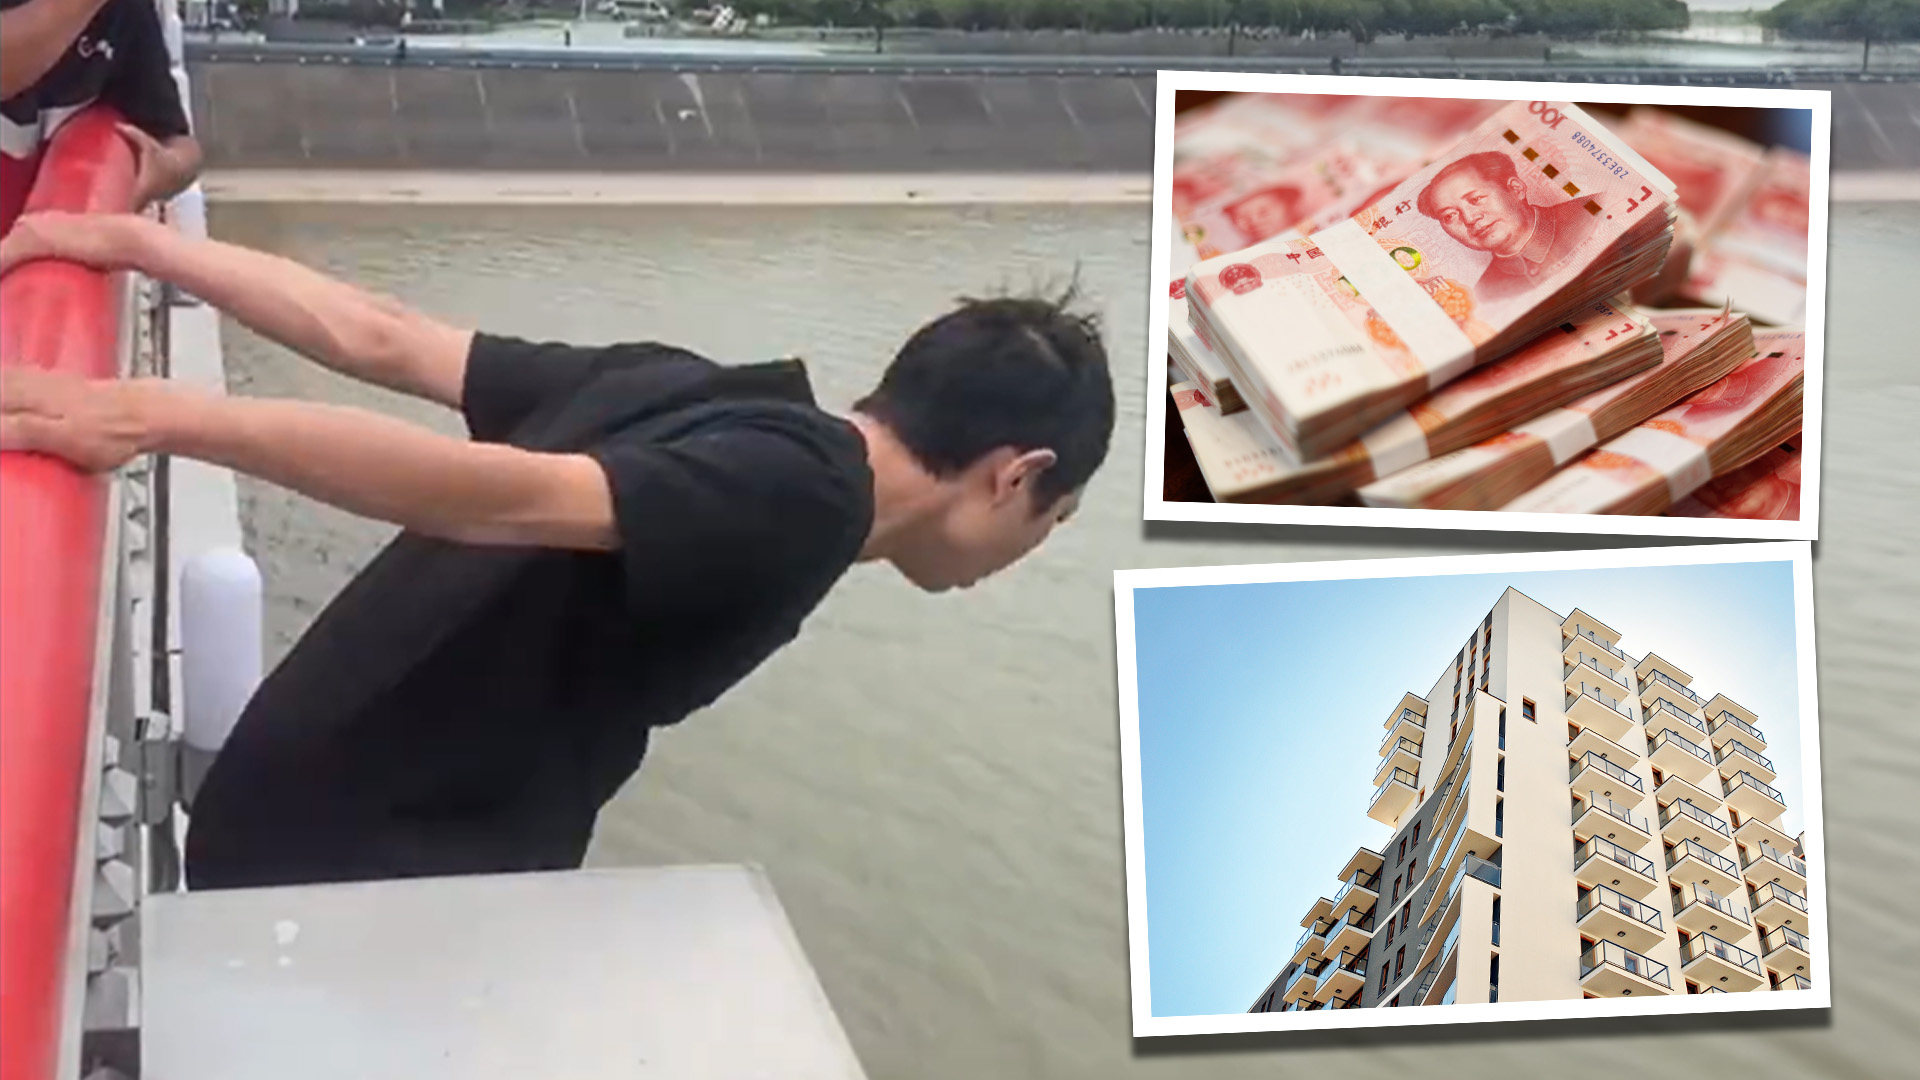 Mainland social media has been filled with praise for a food delivery worker who jumped off a high bridge in China to save a drowning woman but has declined to accept rewards of cash and property in the aftermath of the incident. Photo: SCMP composite/Baidu